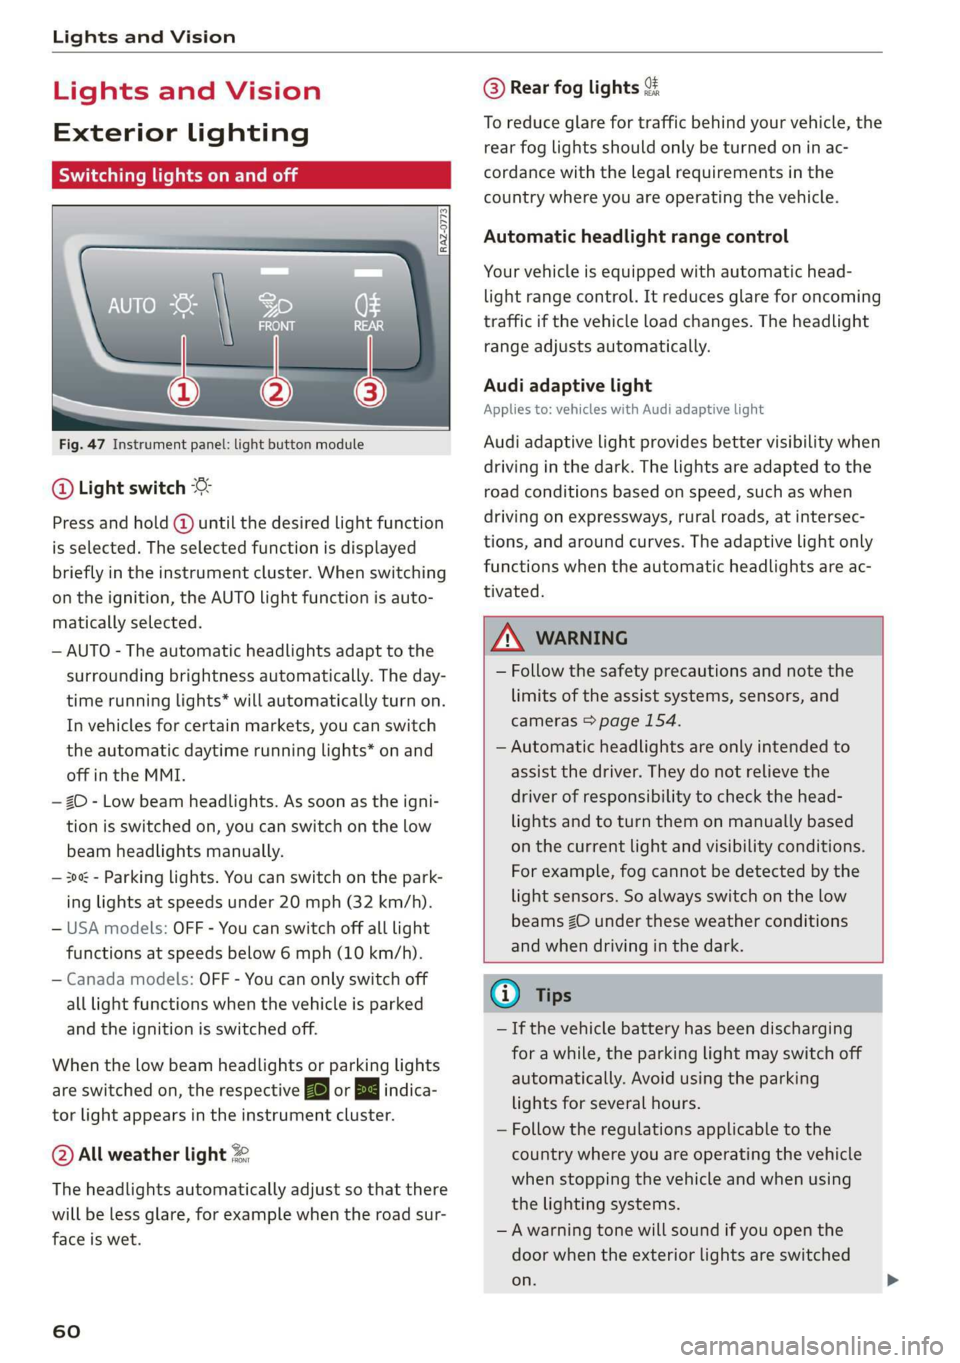 AUDI A8 2020  Owners Manual Lights and Vision 
  
Lights and Vision 
Exterior lighting 
Sitar MeL Lats eal 
  
  
Fig. 47 Instrument panel: light button module 
@ Light switch & 
Press and hold @ until the desired light function